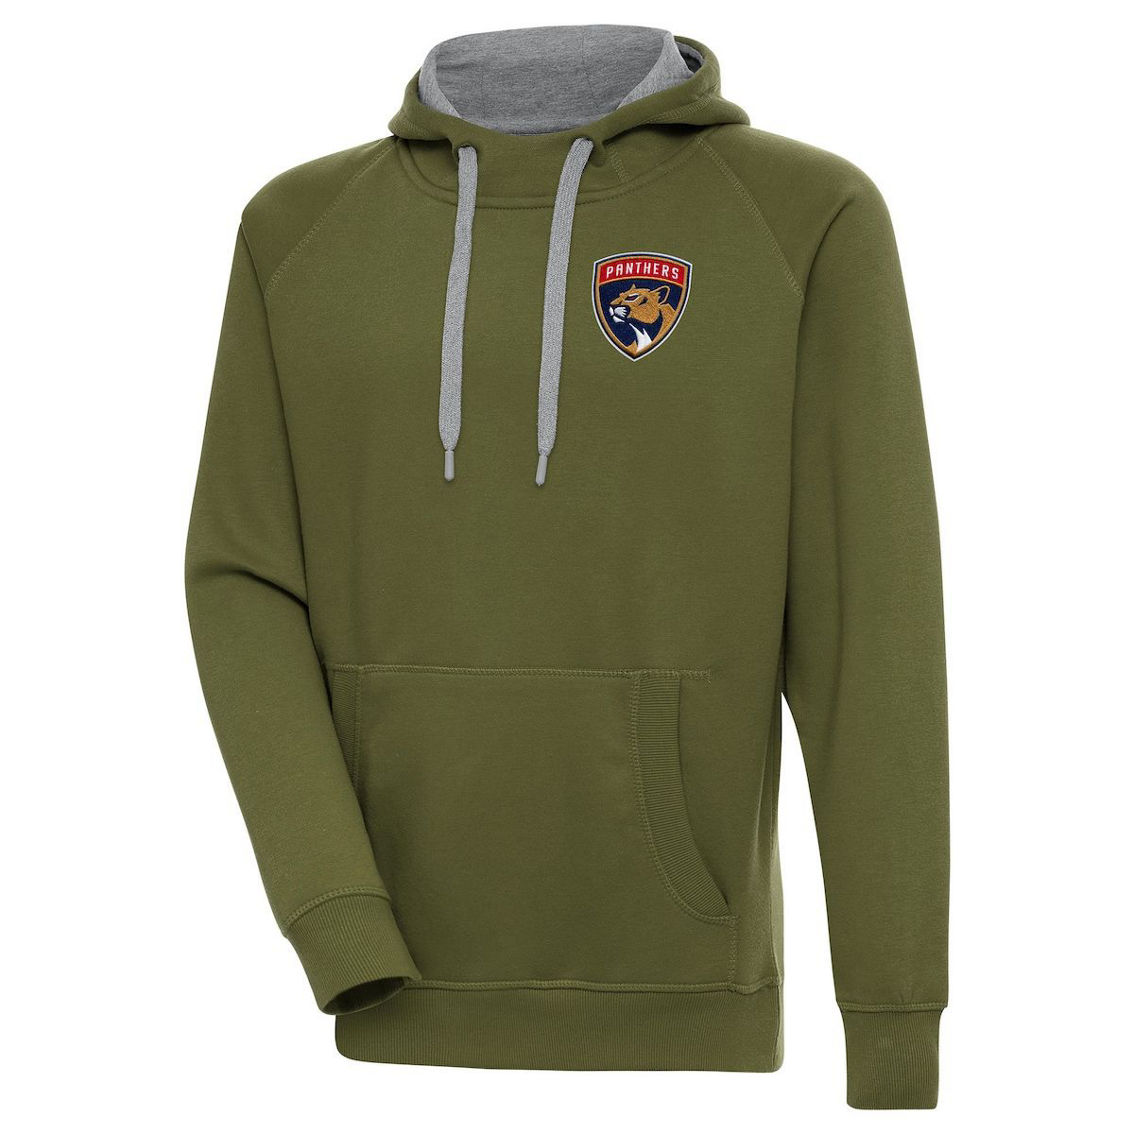 Antigua Men's Olive Florida Panthers Victory Pullover Hoodie - Image 2 of 2